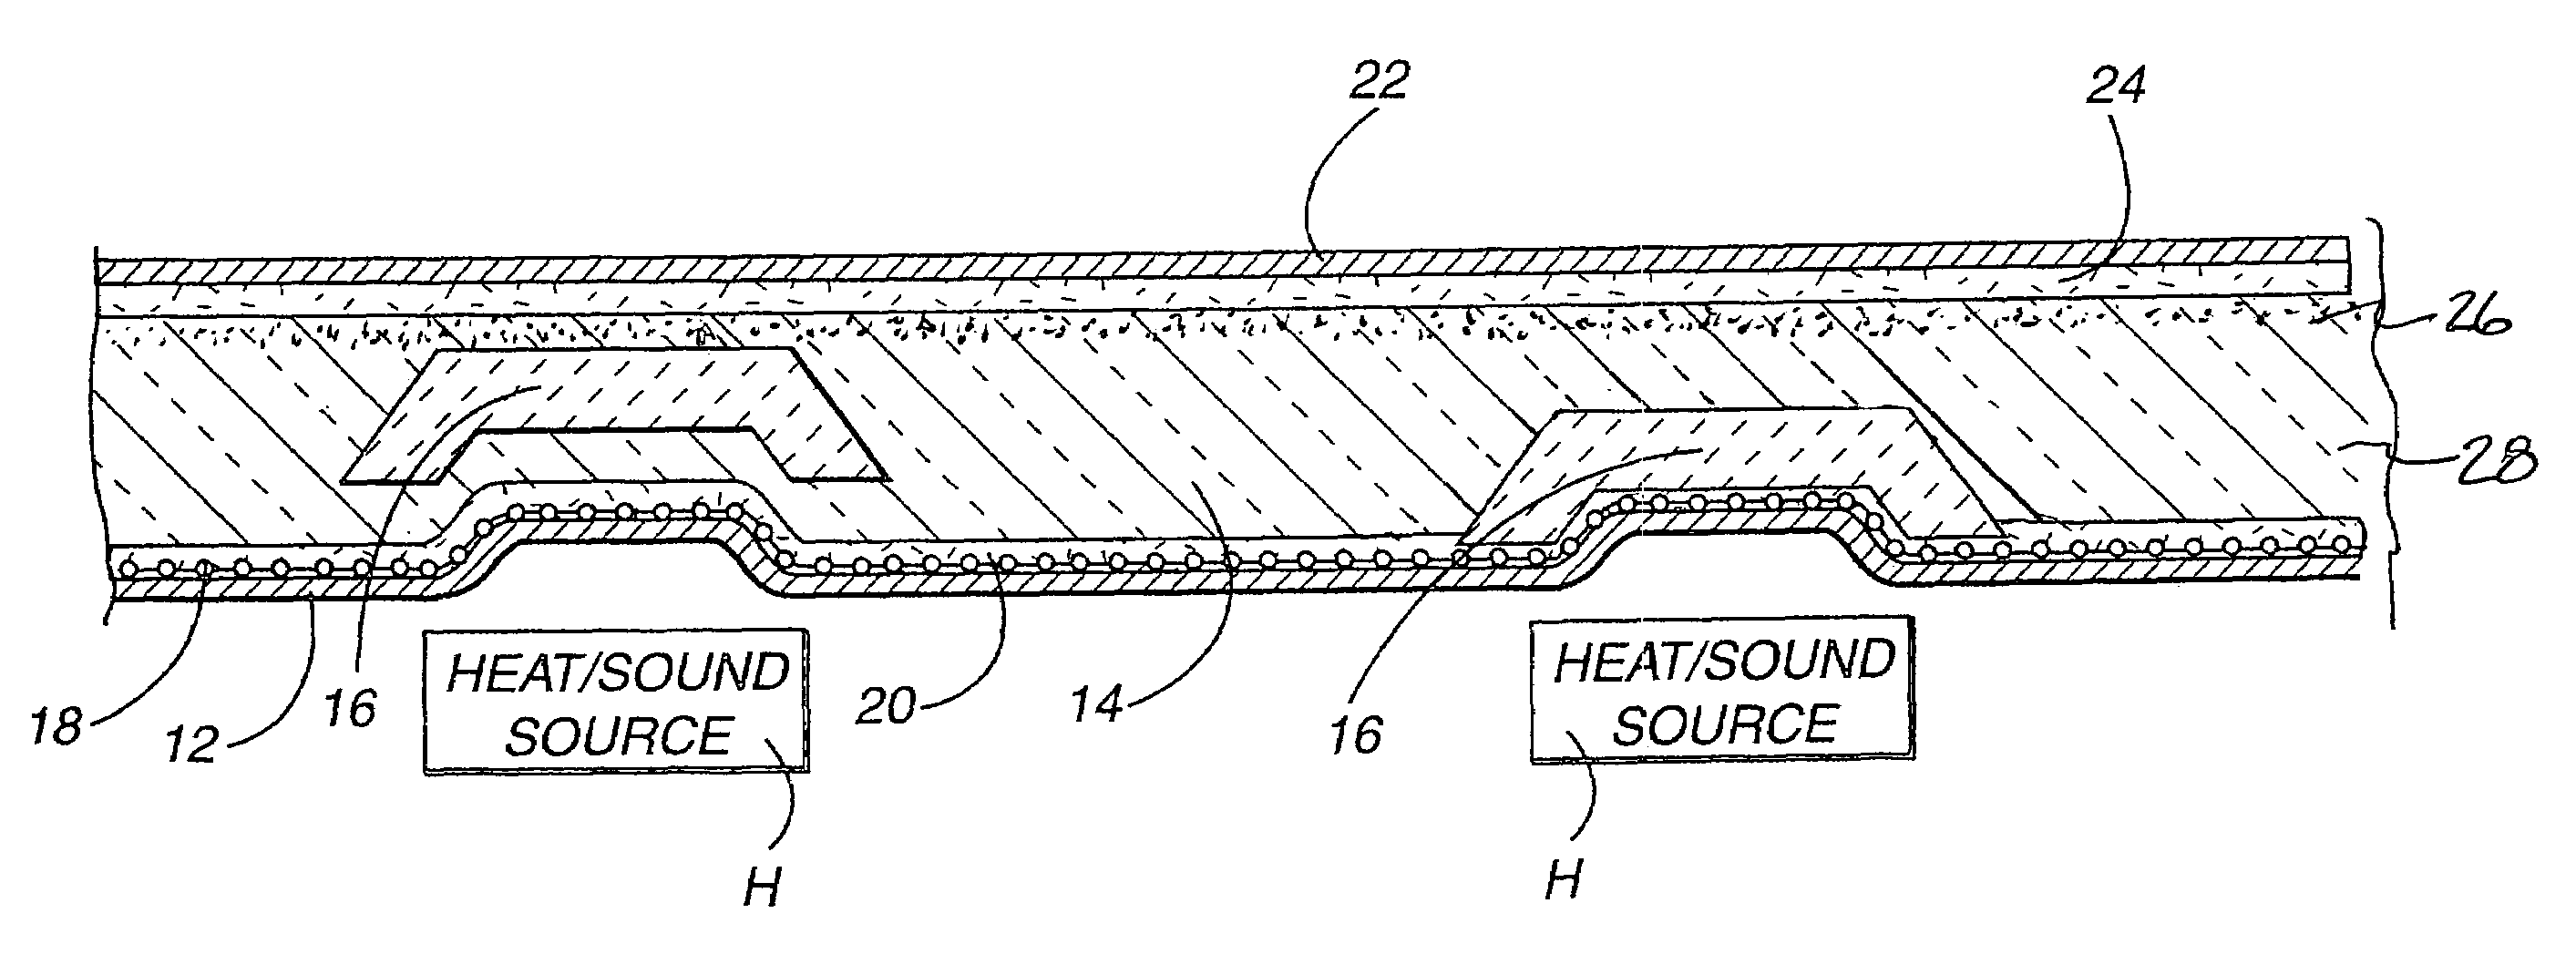 Acoustical and thermal insulator